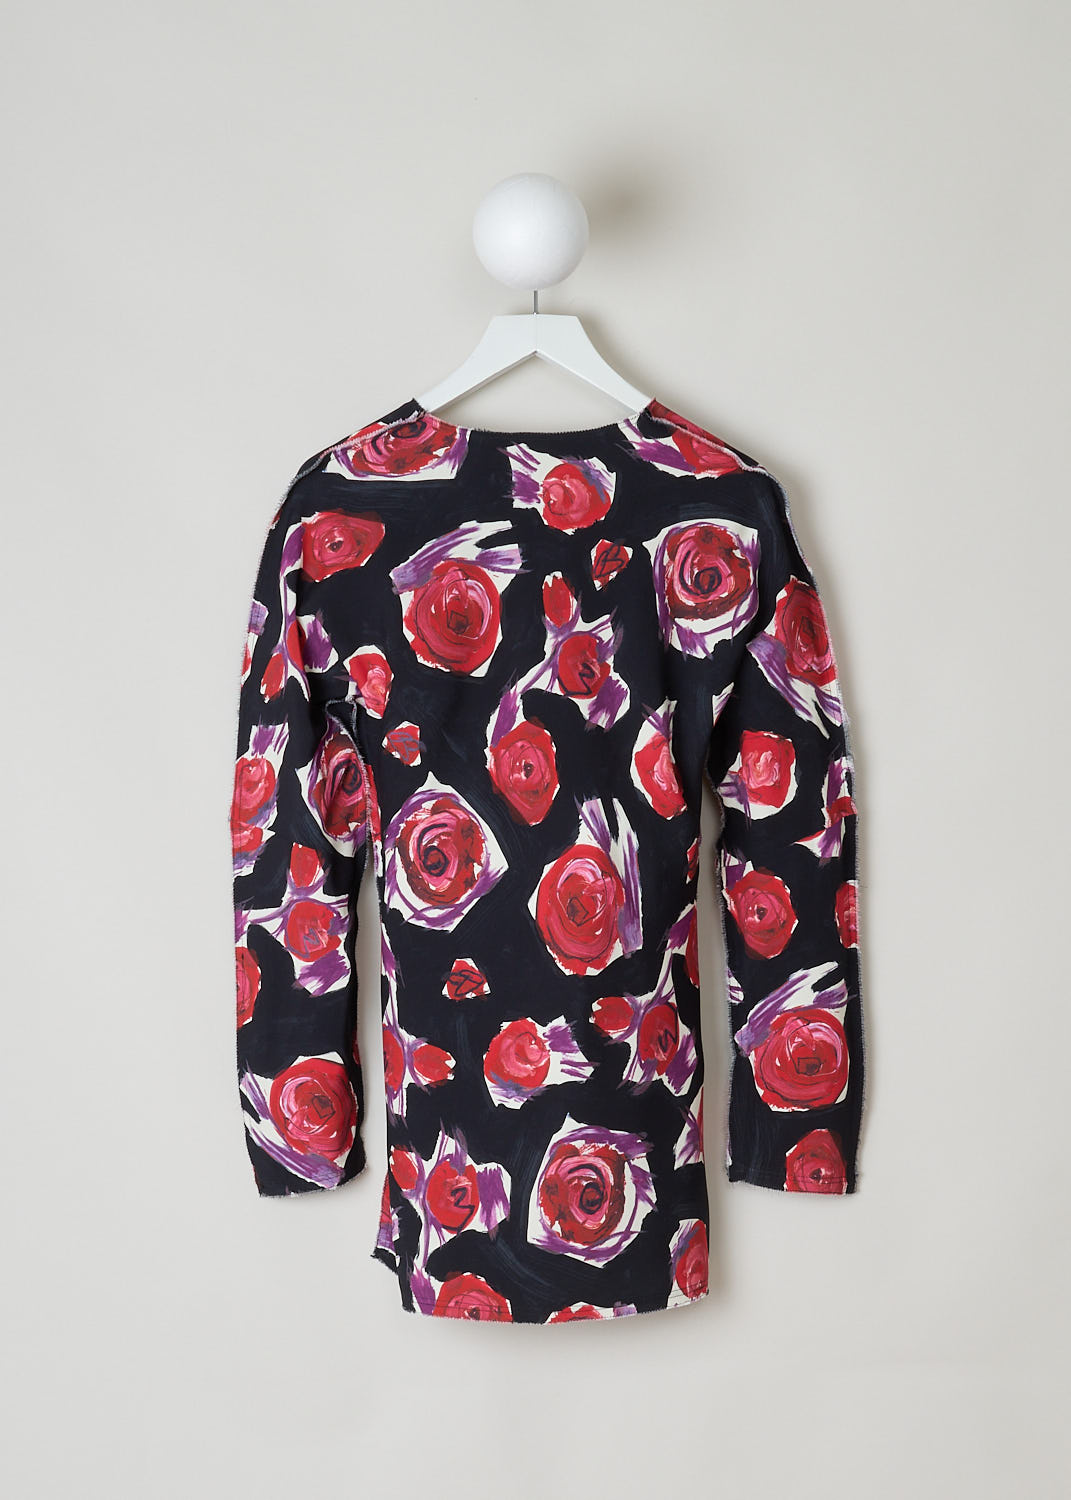 MARNI, ROSE PRINTED LONG SLEEVE TOP, CAMA0486A0_UTV908_SRN99, Print, Back, This long sleeve top has a rose print. The top features a V-neckline, small slits on the sleeves and on either side. The top has a raw hemline throughout.
